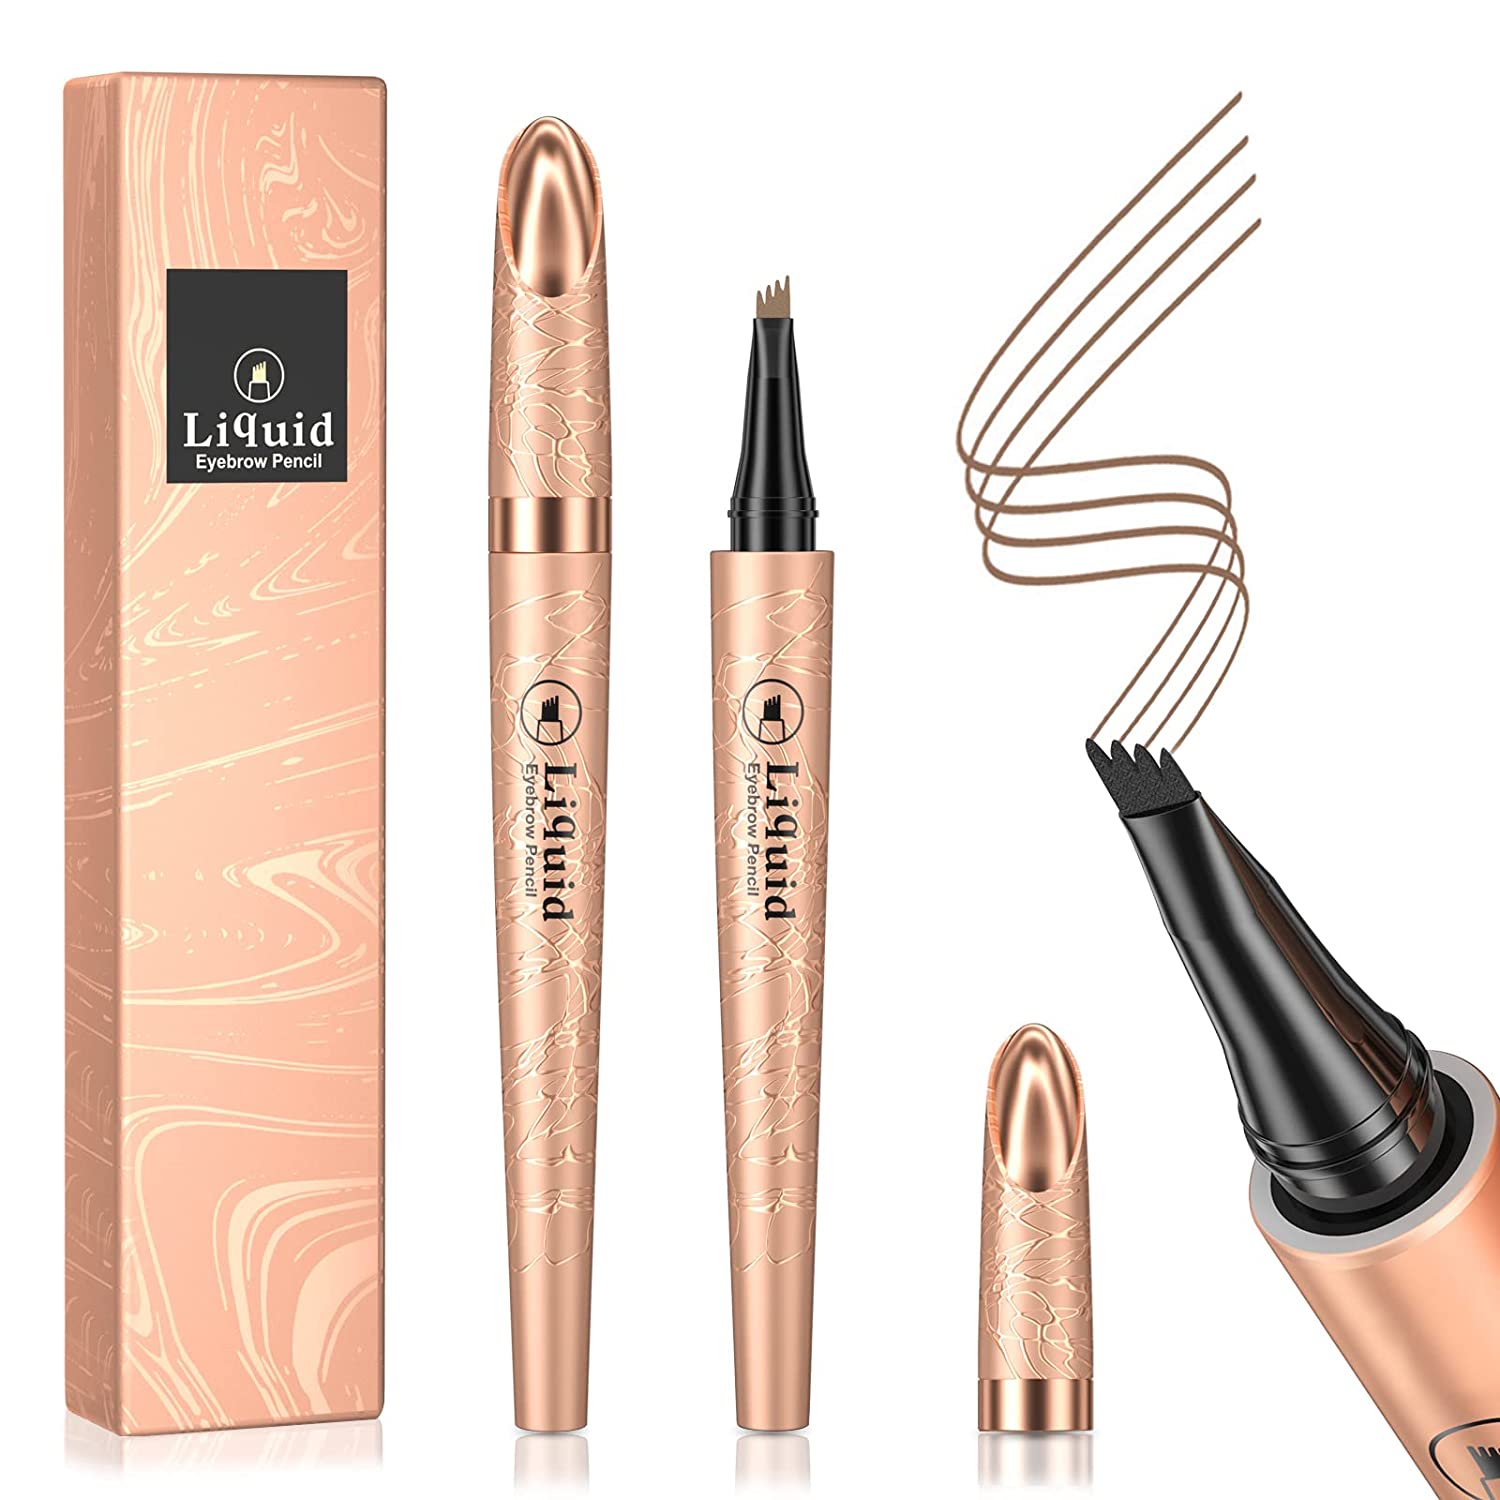 Housn Eyebrow Pencil, Eyebrow Pencil with fork Tip, Smudge-Proof, Waterproof Liquid Eyebrow Pencil, Quick Drying and Durable, Build a Highly Natural Make-up (01# Light Brown)